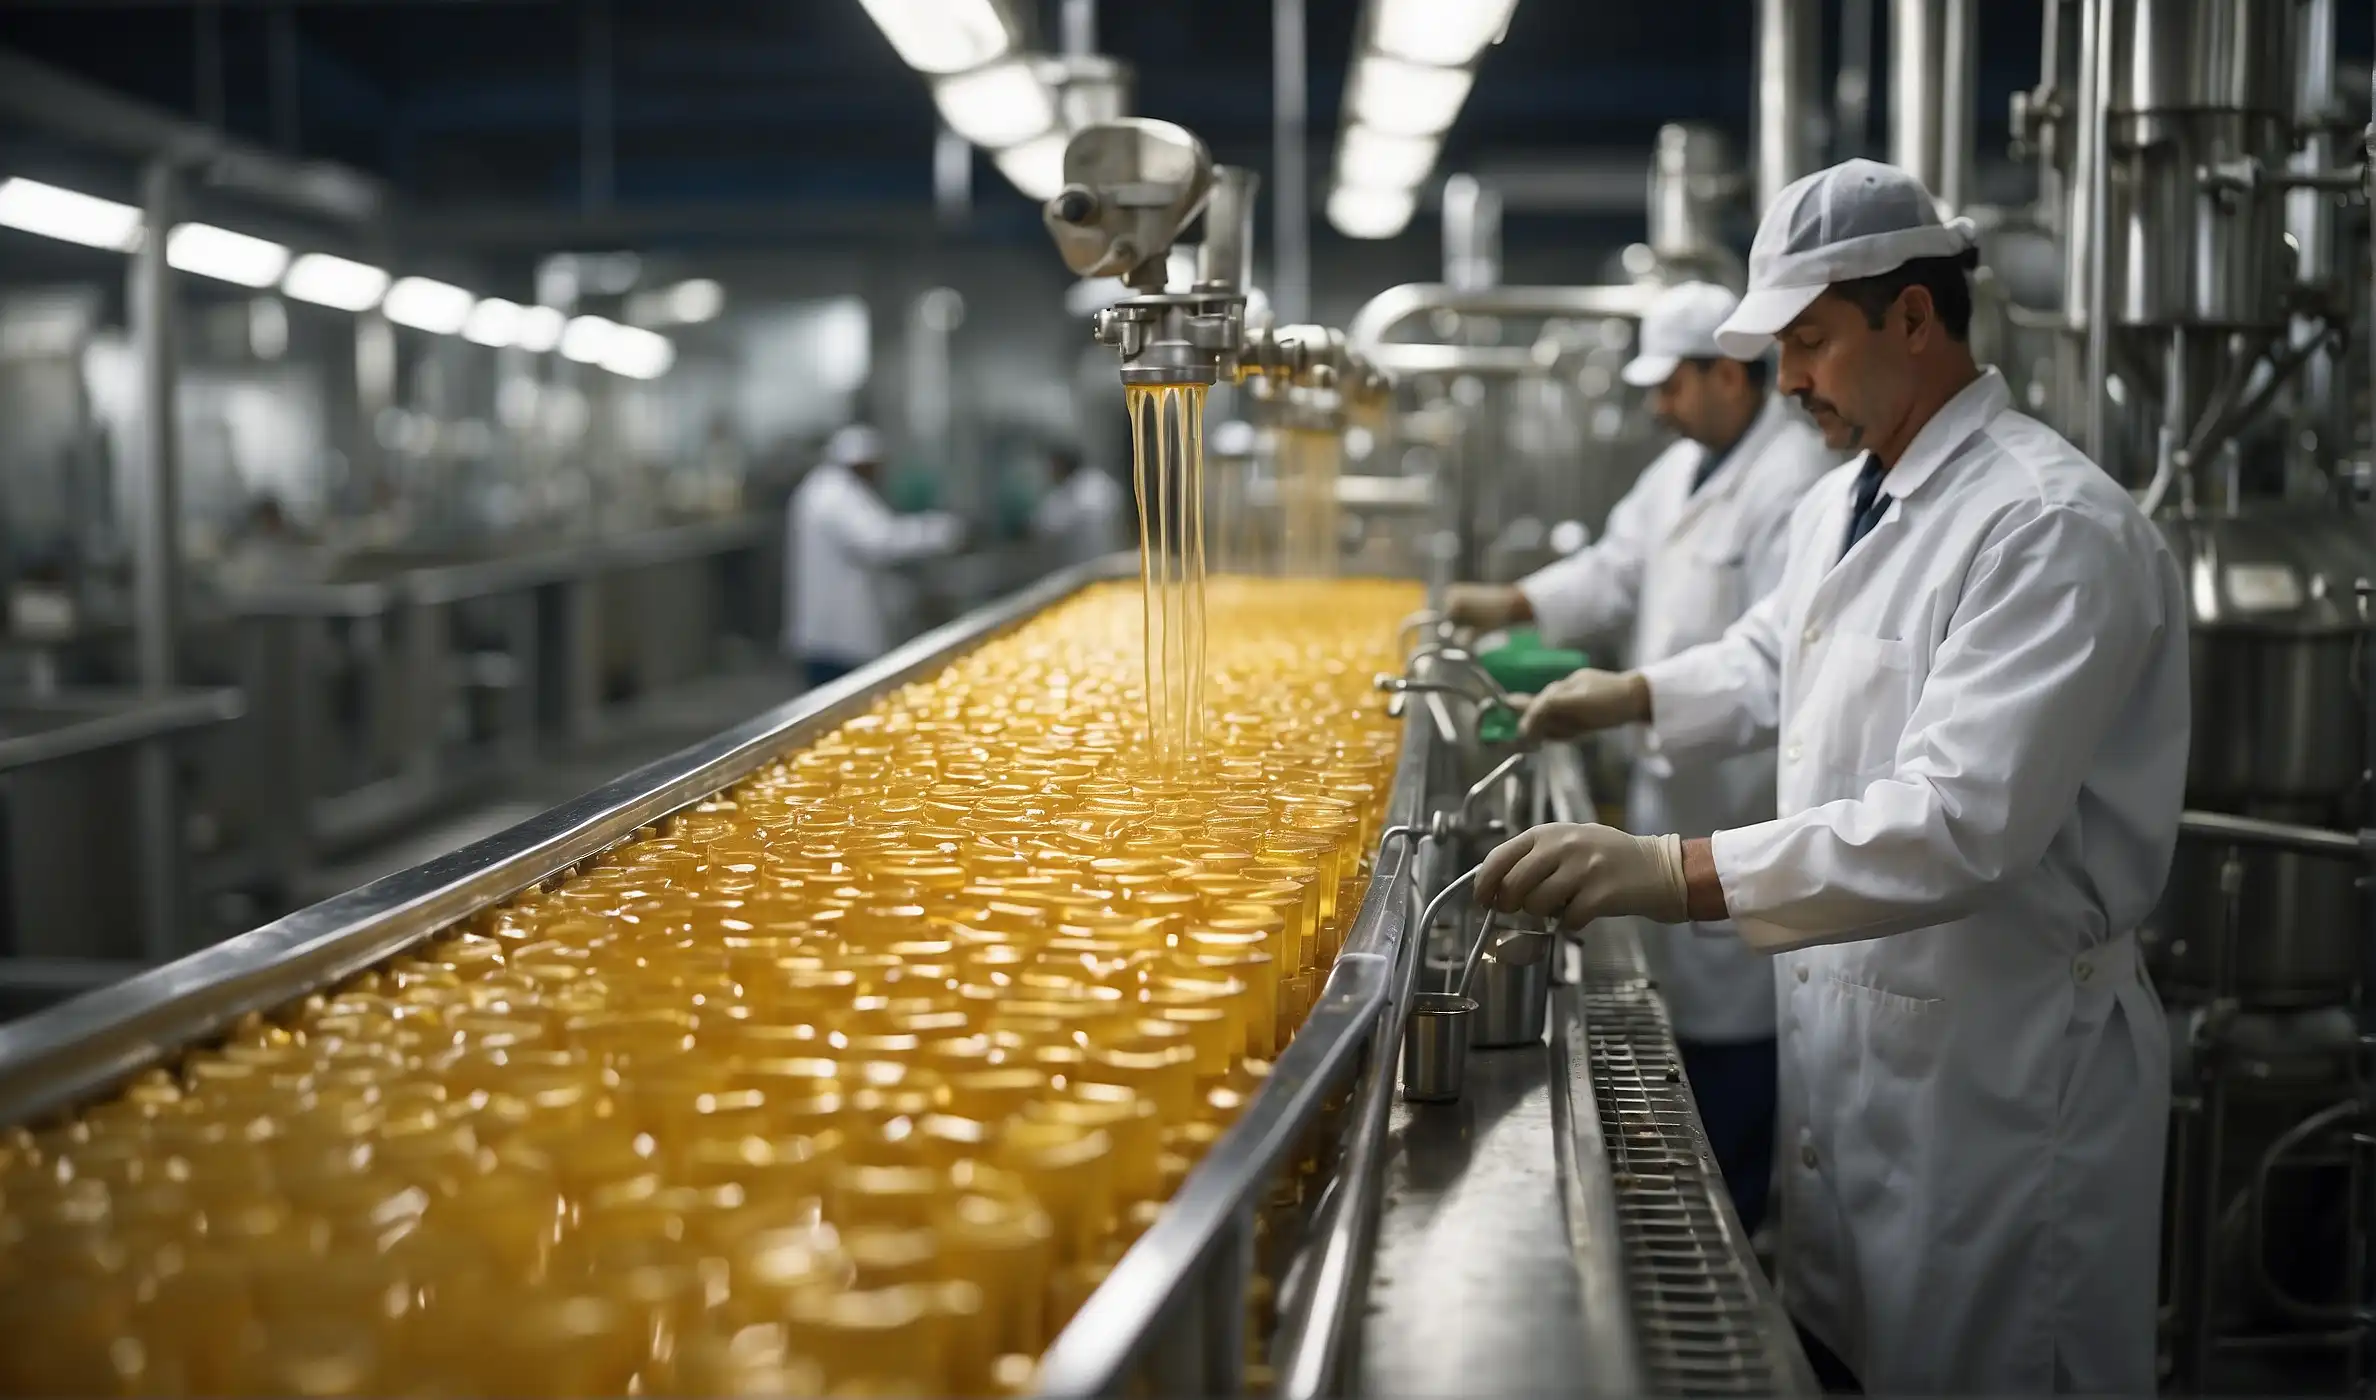 High fructose corn syrup being processed in a factory